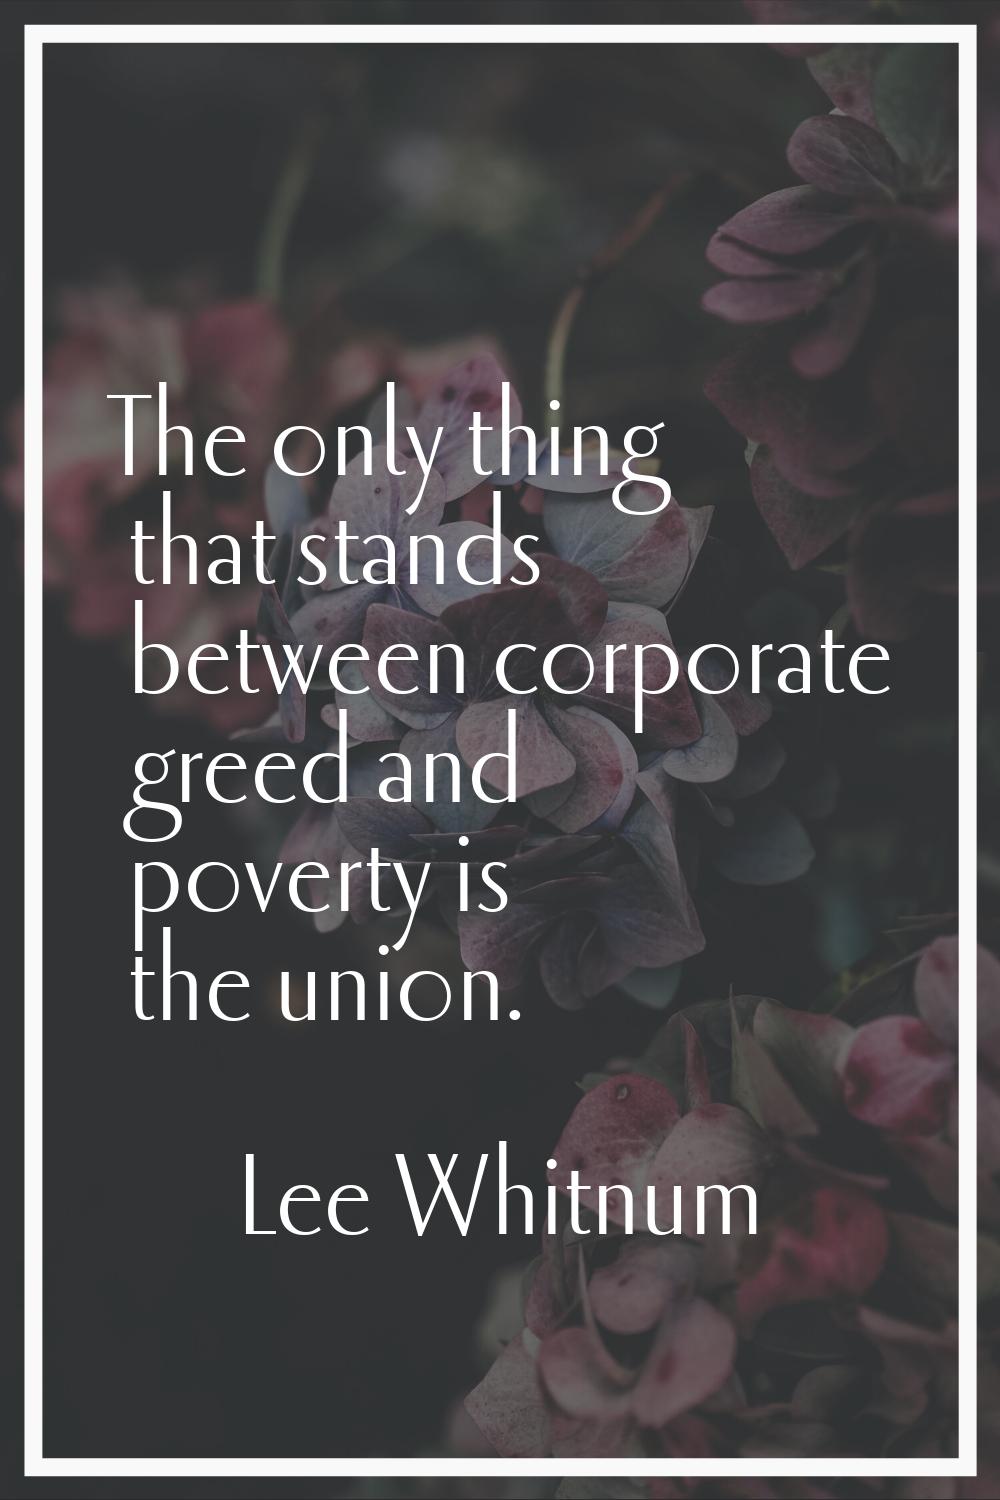 The only thing that stands between corporate greed and poverty is the union.